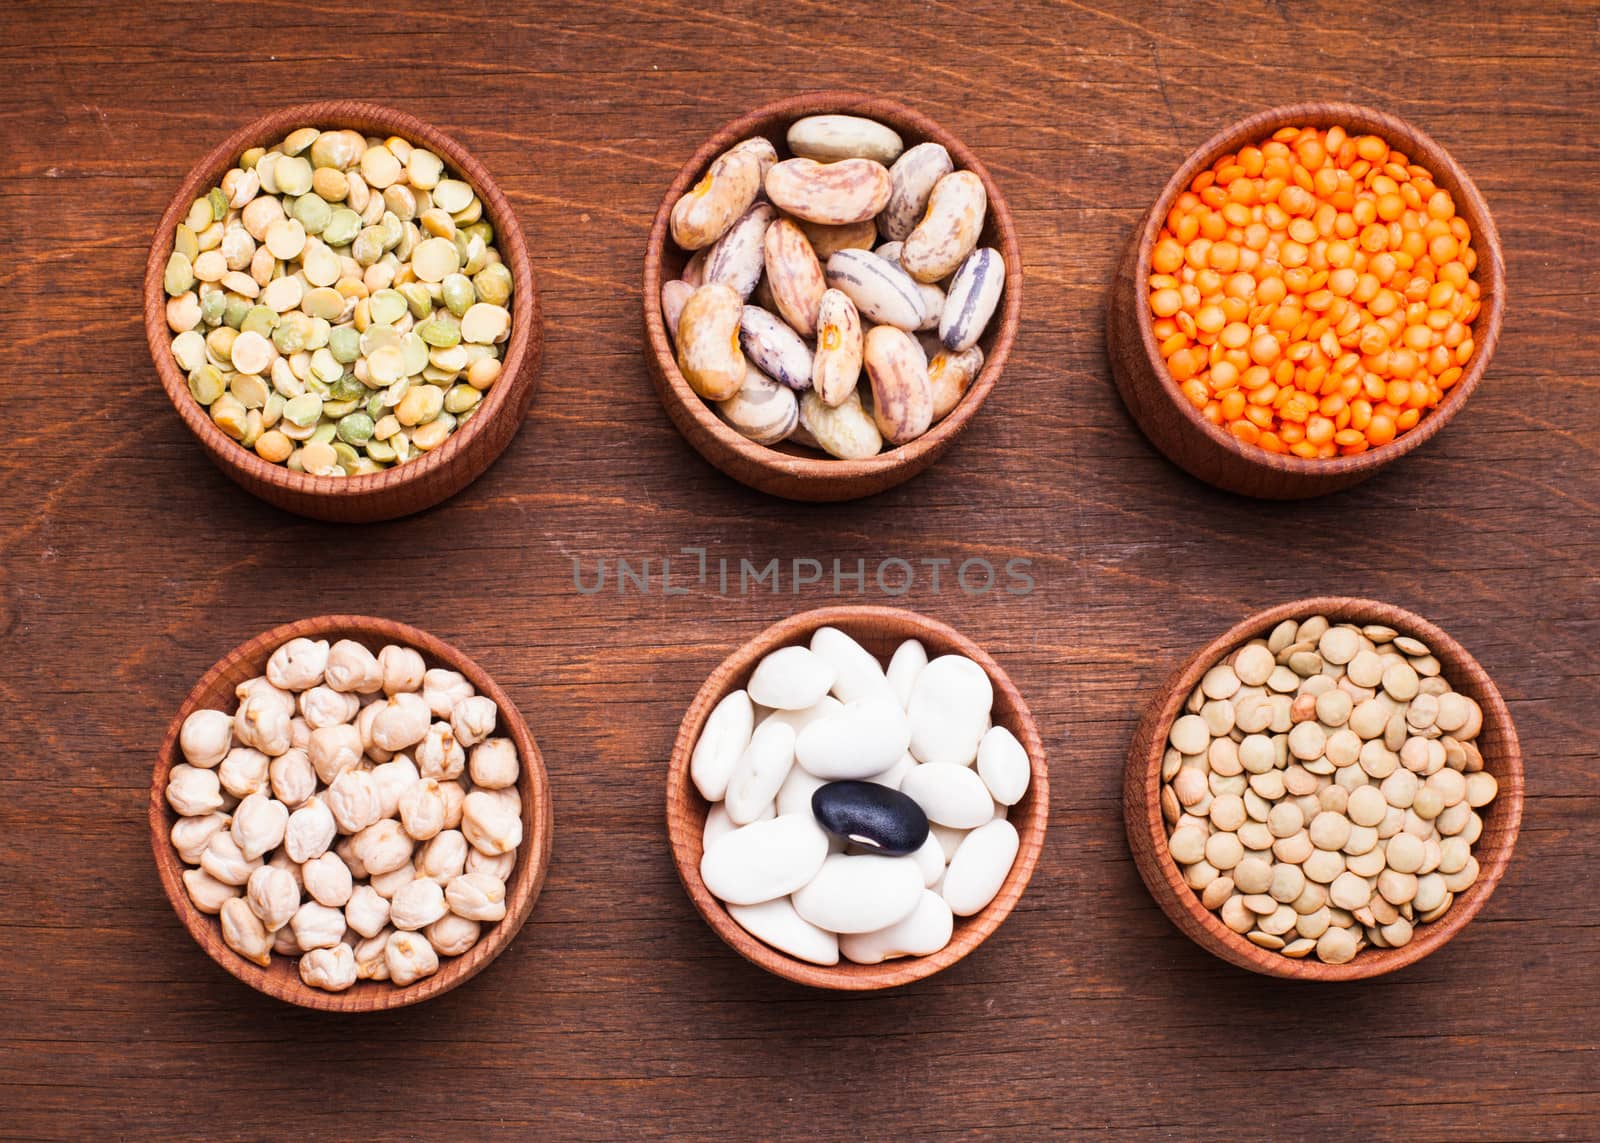 Types of beans by oksix